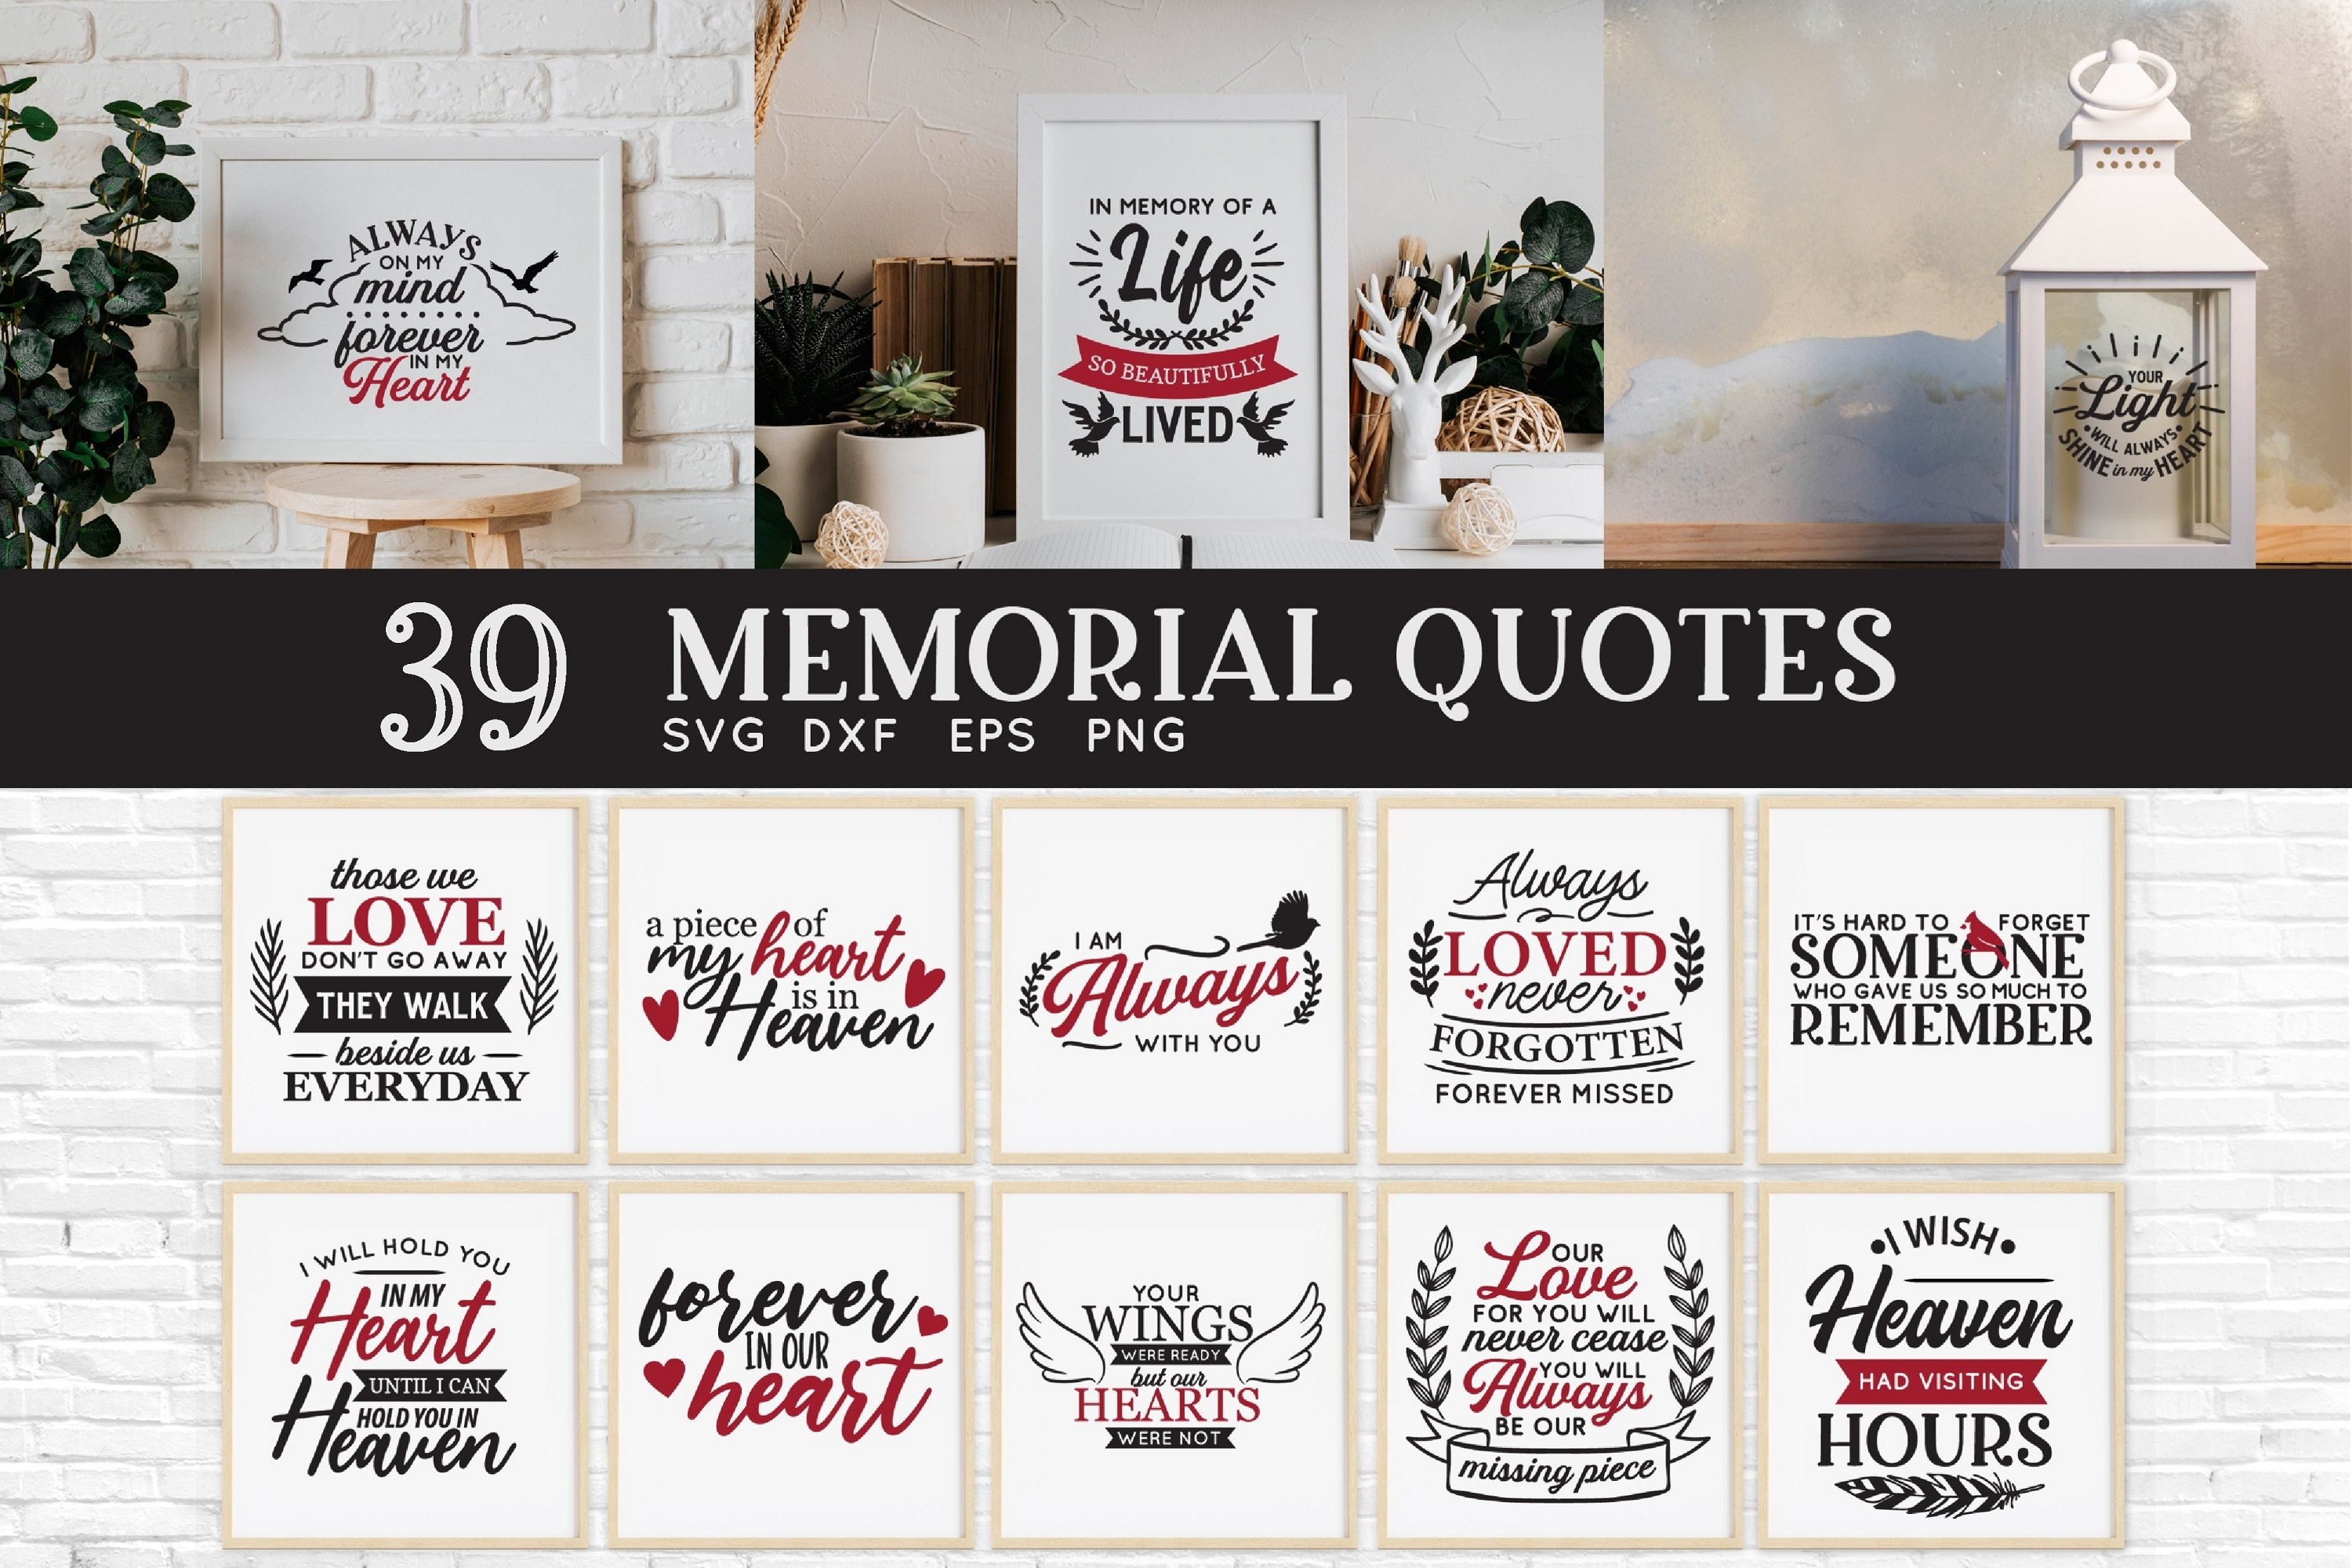 Collection of memorial quotes.